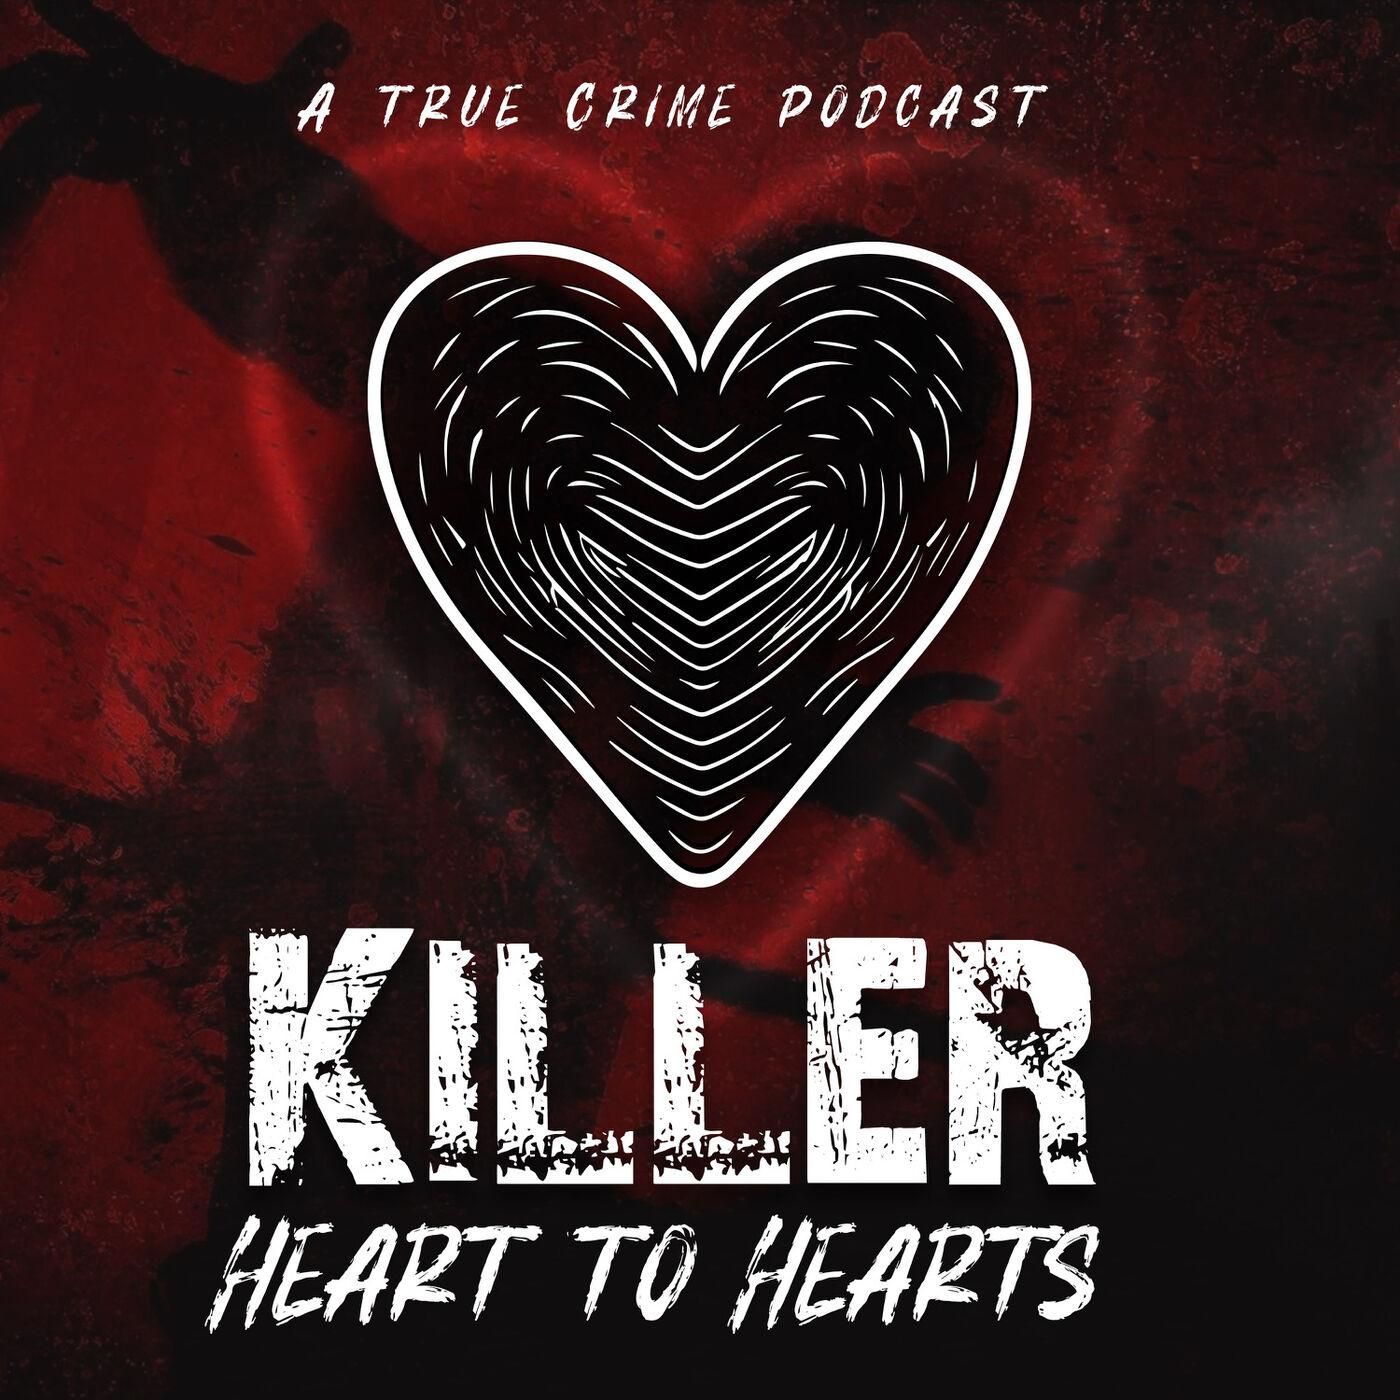 The Bodyguard (Part 1) by Killer Heart To Hearts